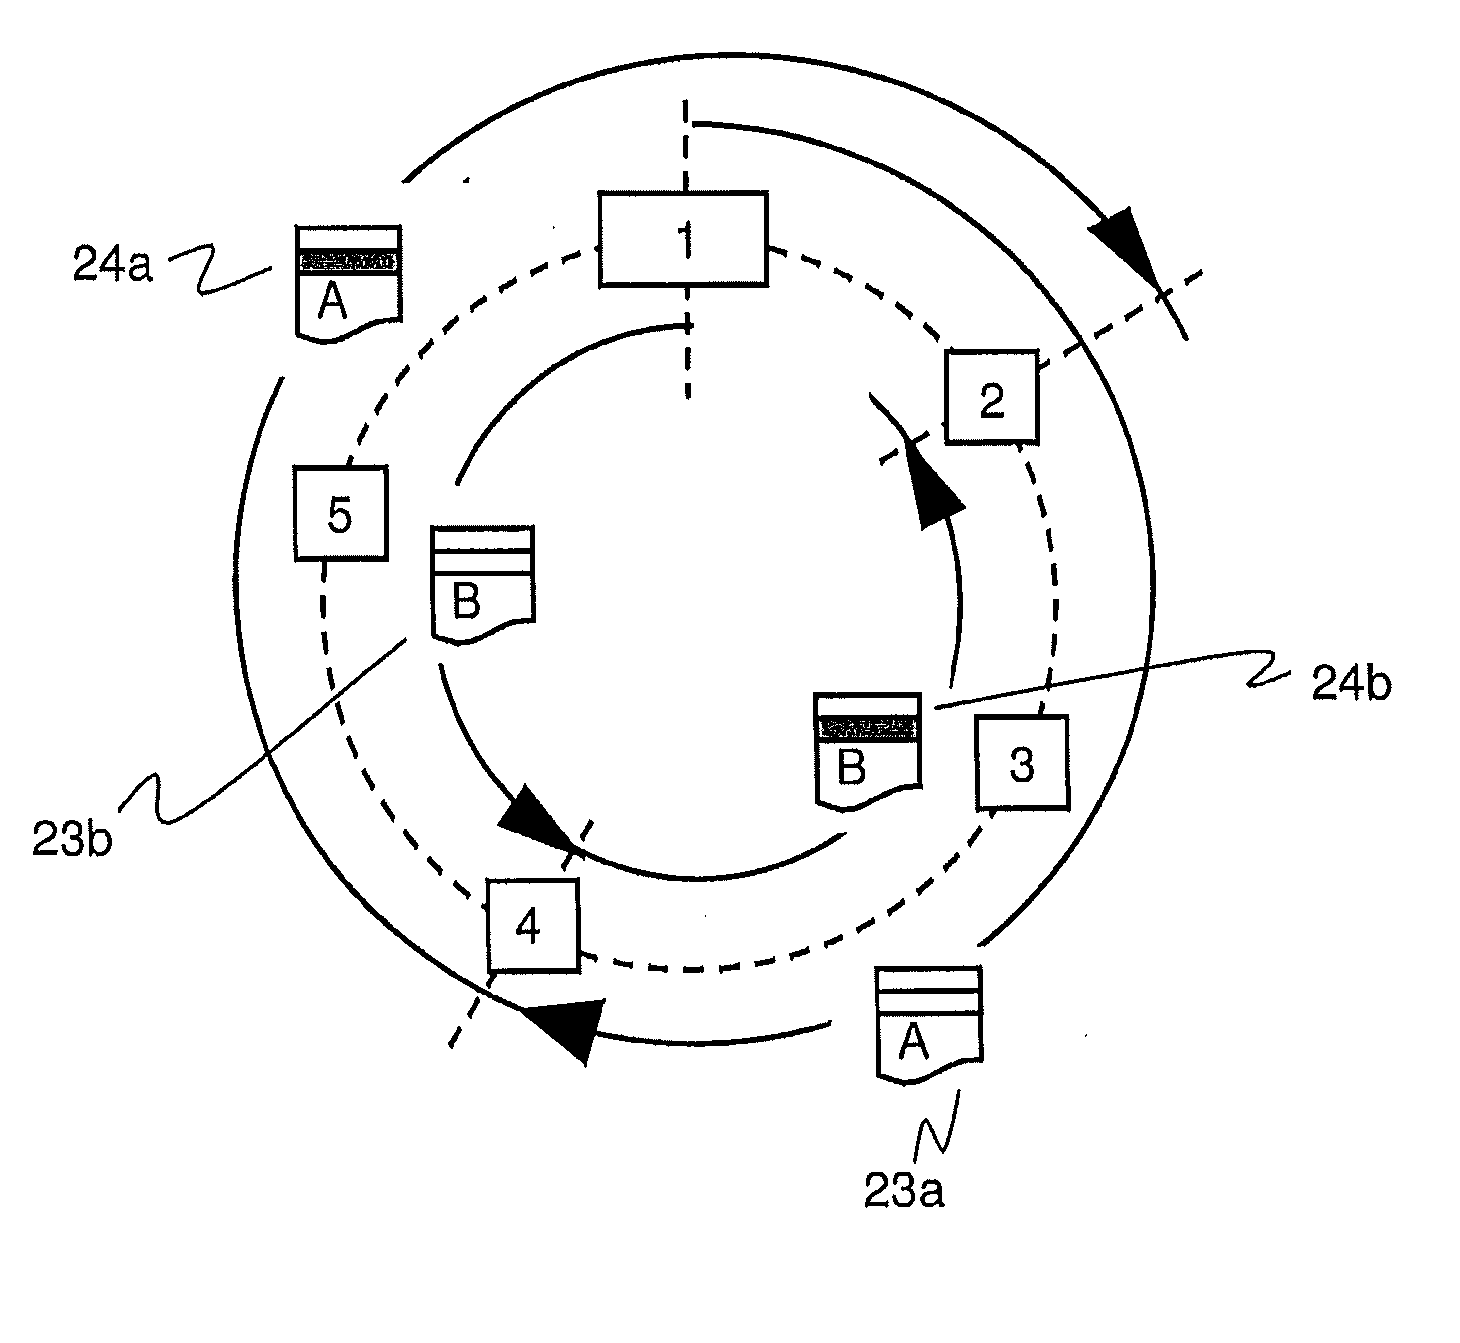 Data transmission in a ring-type communication network